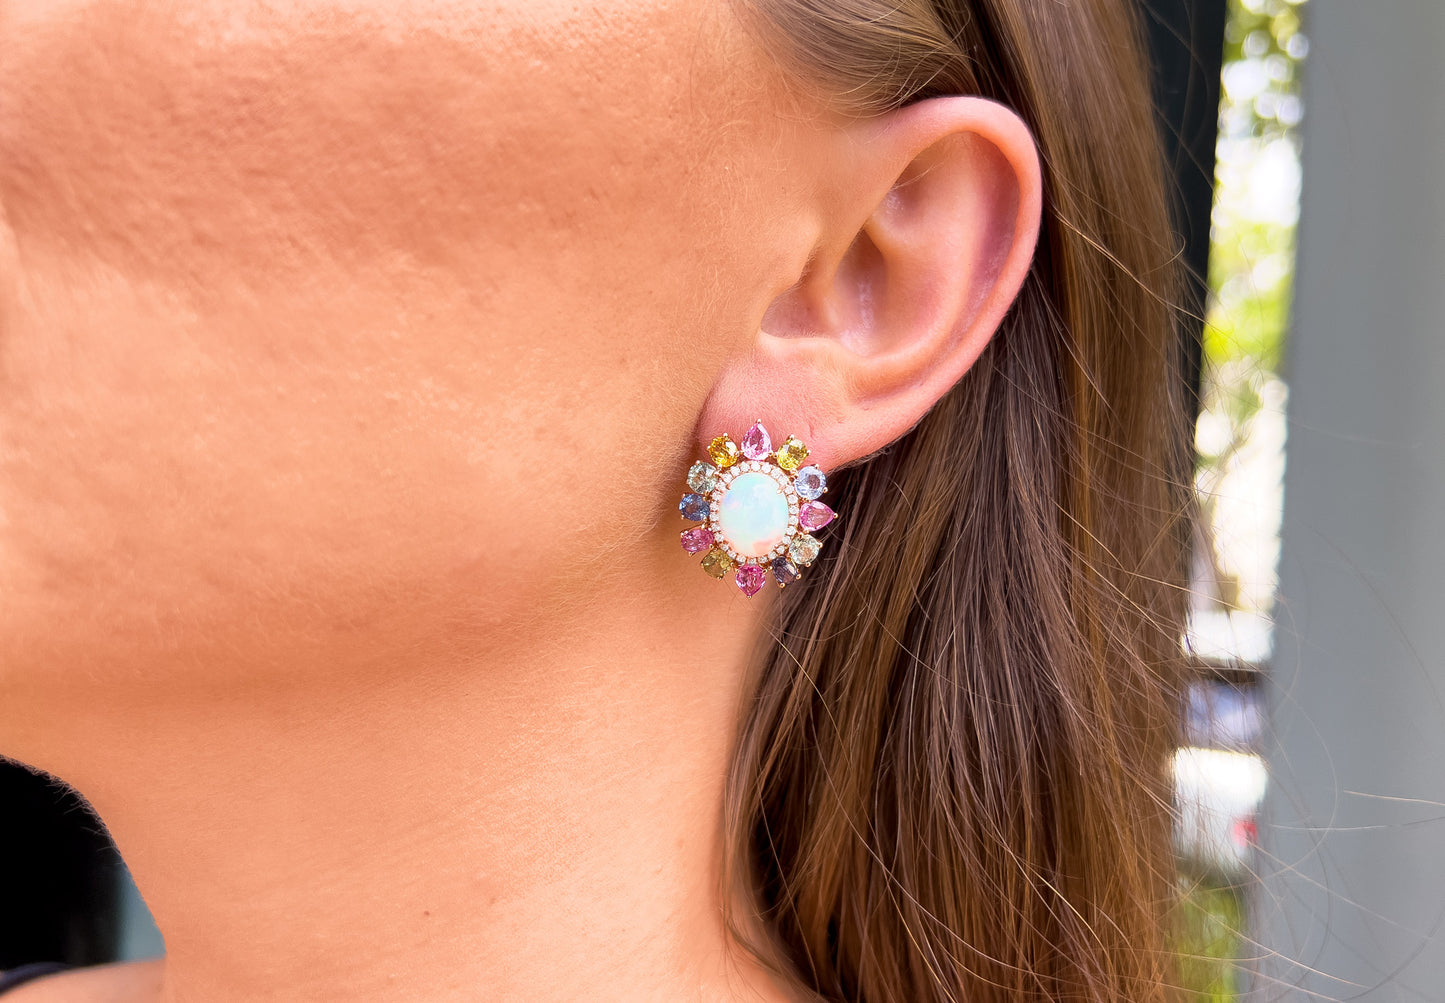 Opal Earrings With Colored Stones and White Diamond Halo 18K Gold